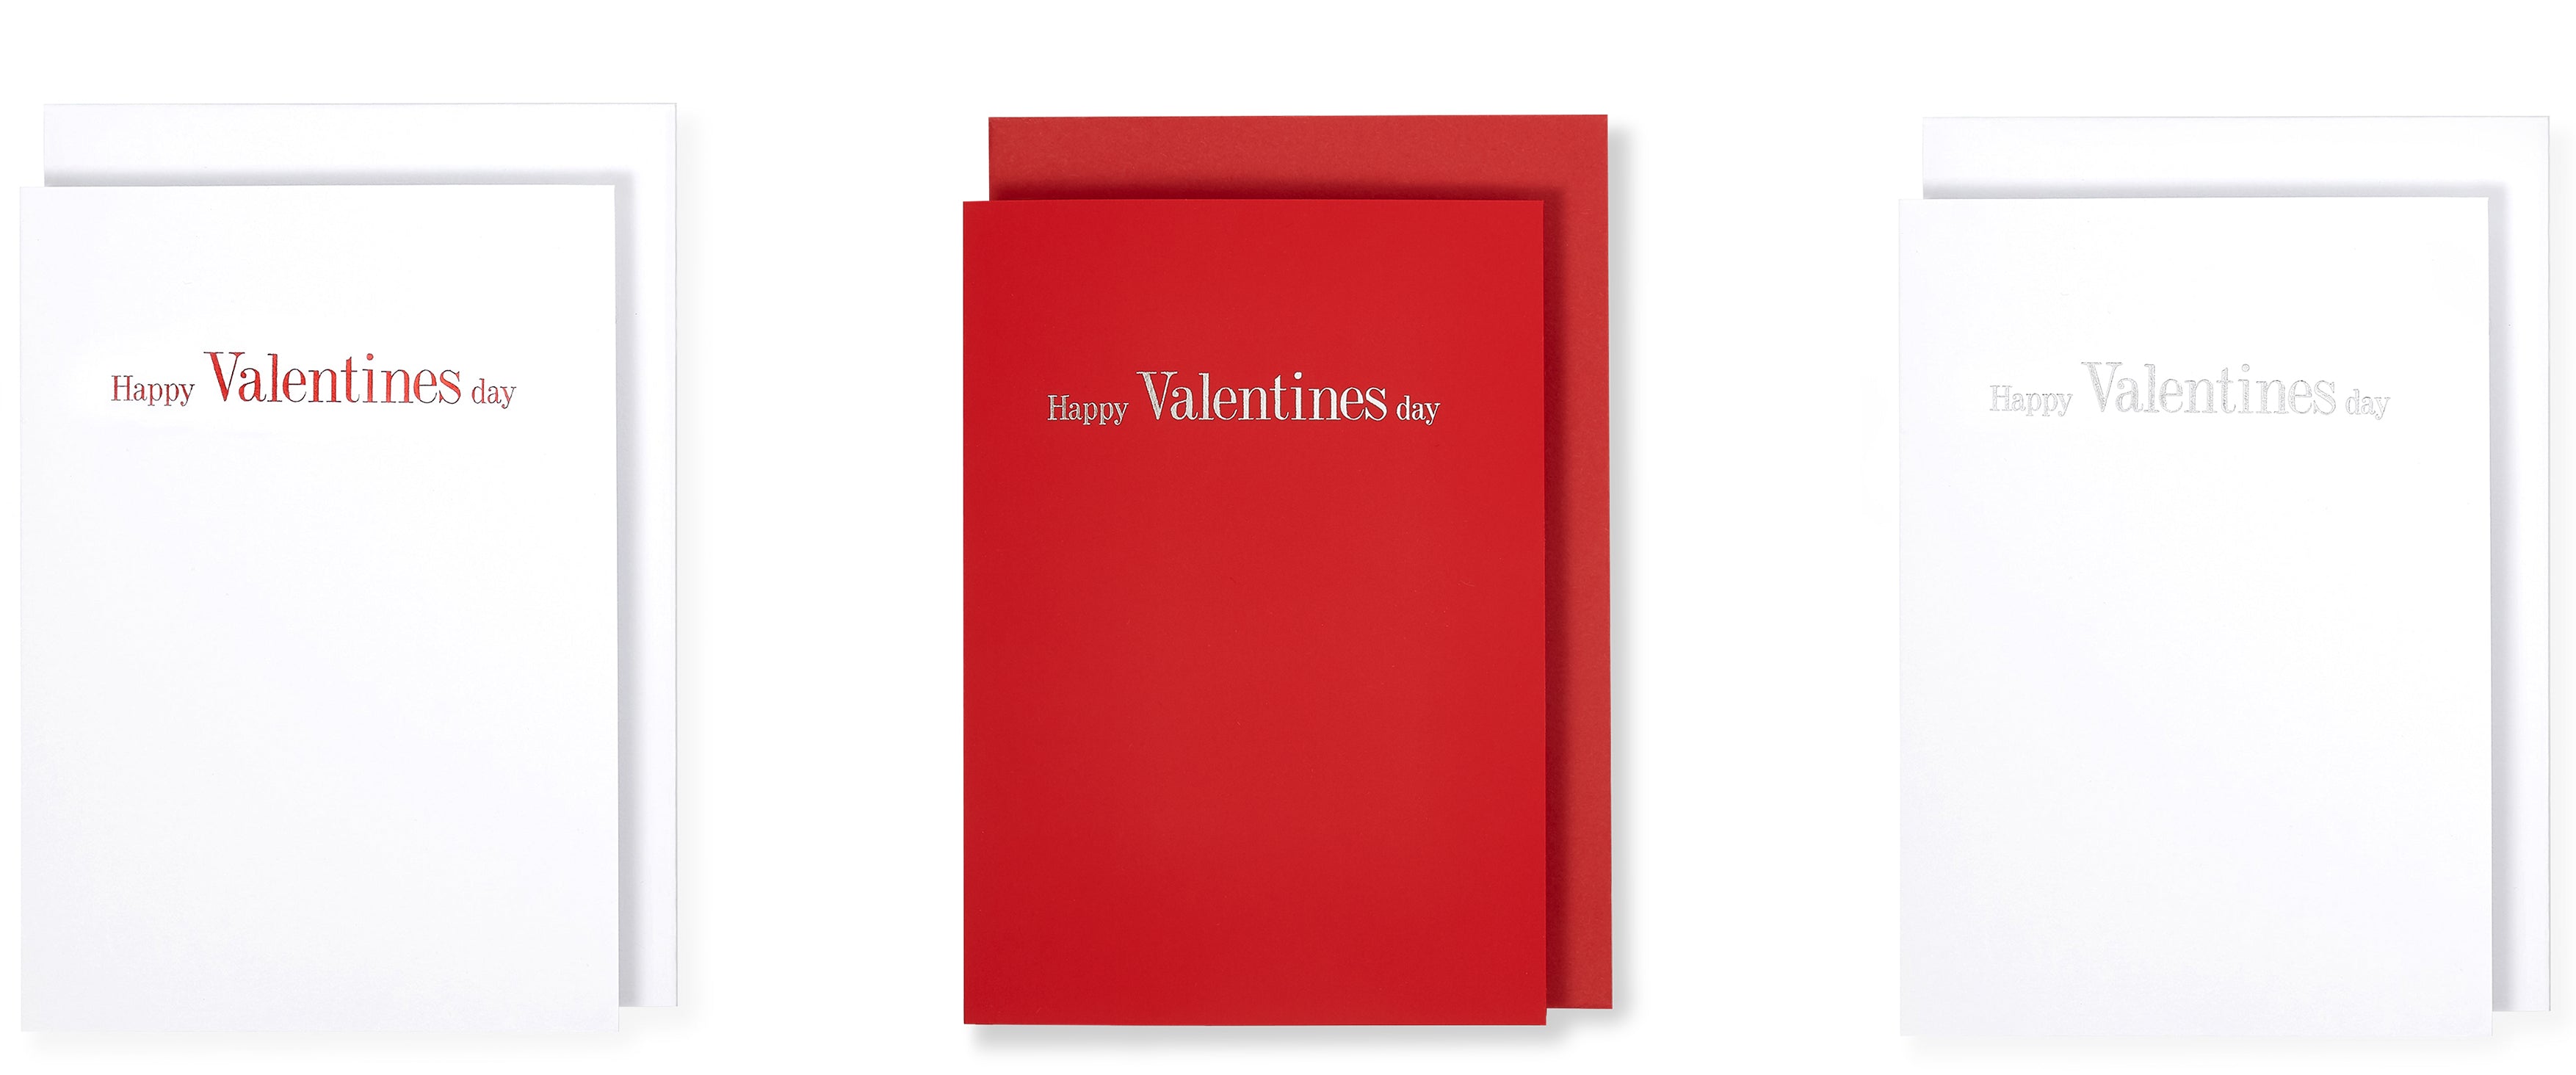 Traditional Valentine's Day Cards - Story of Elegance